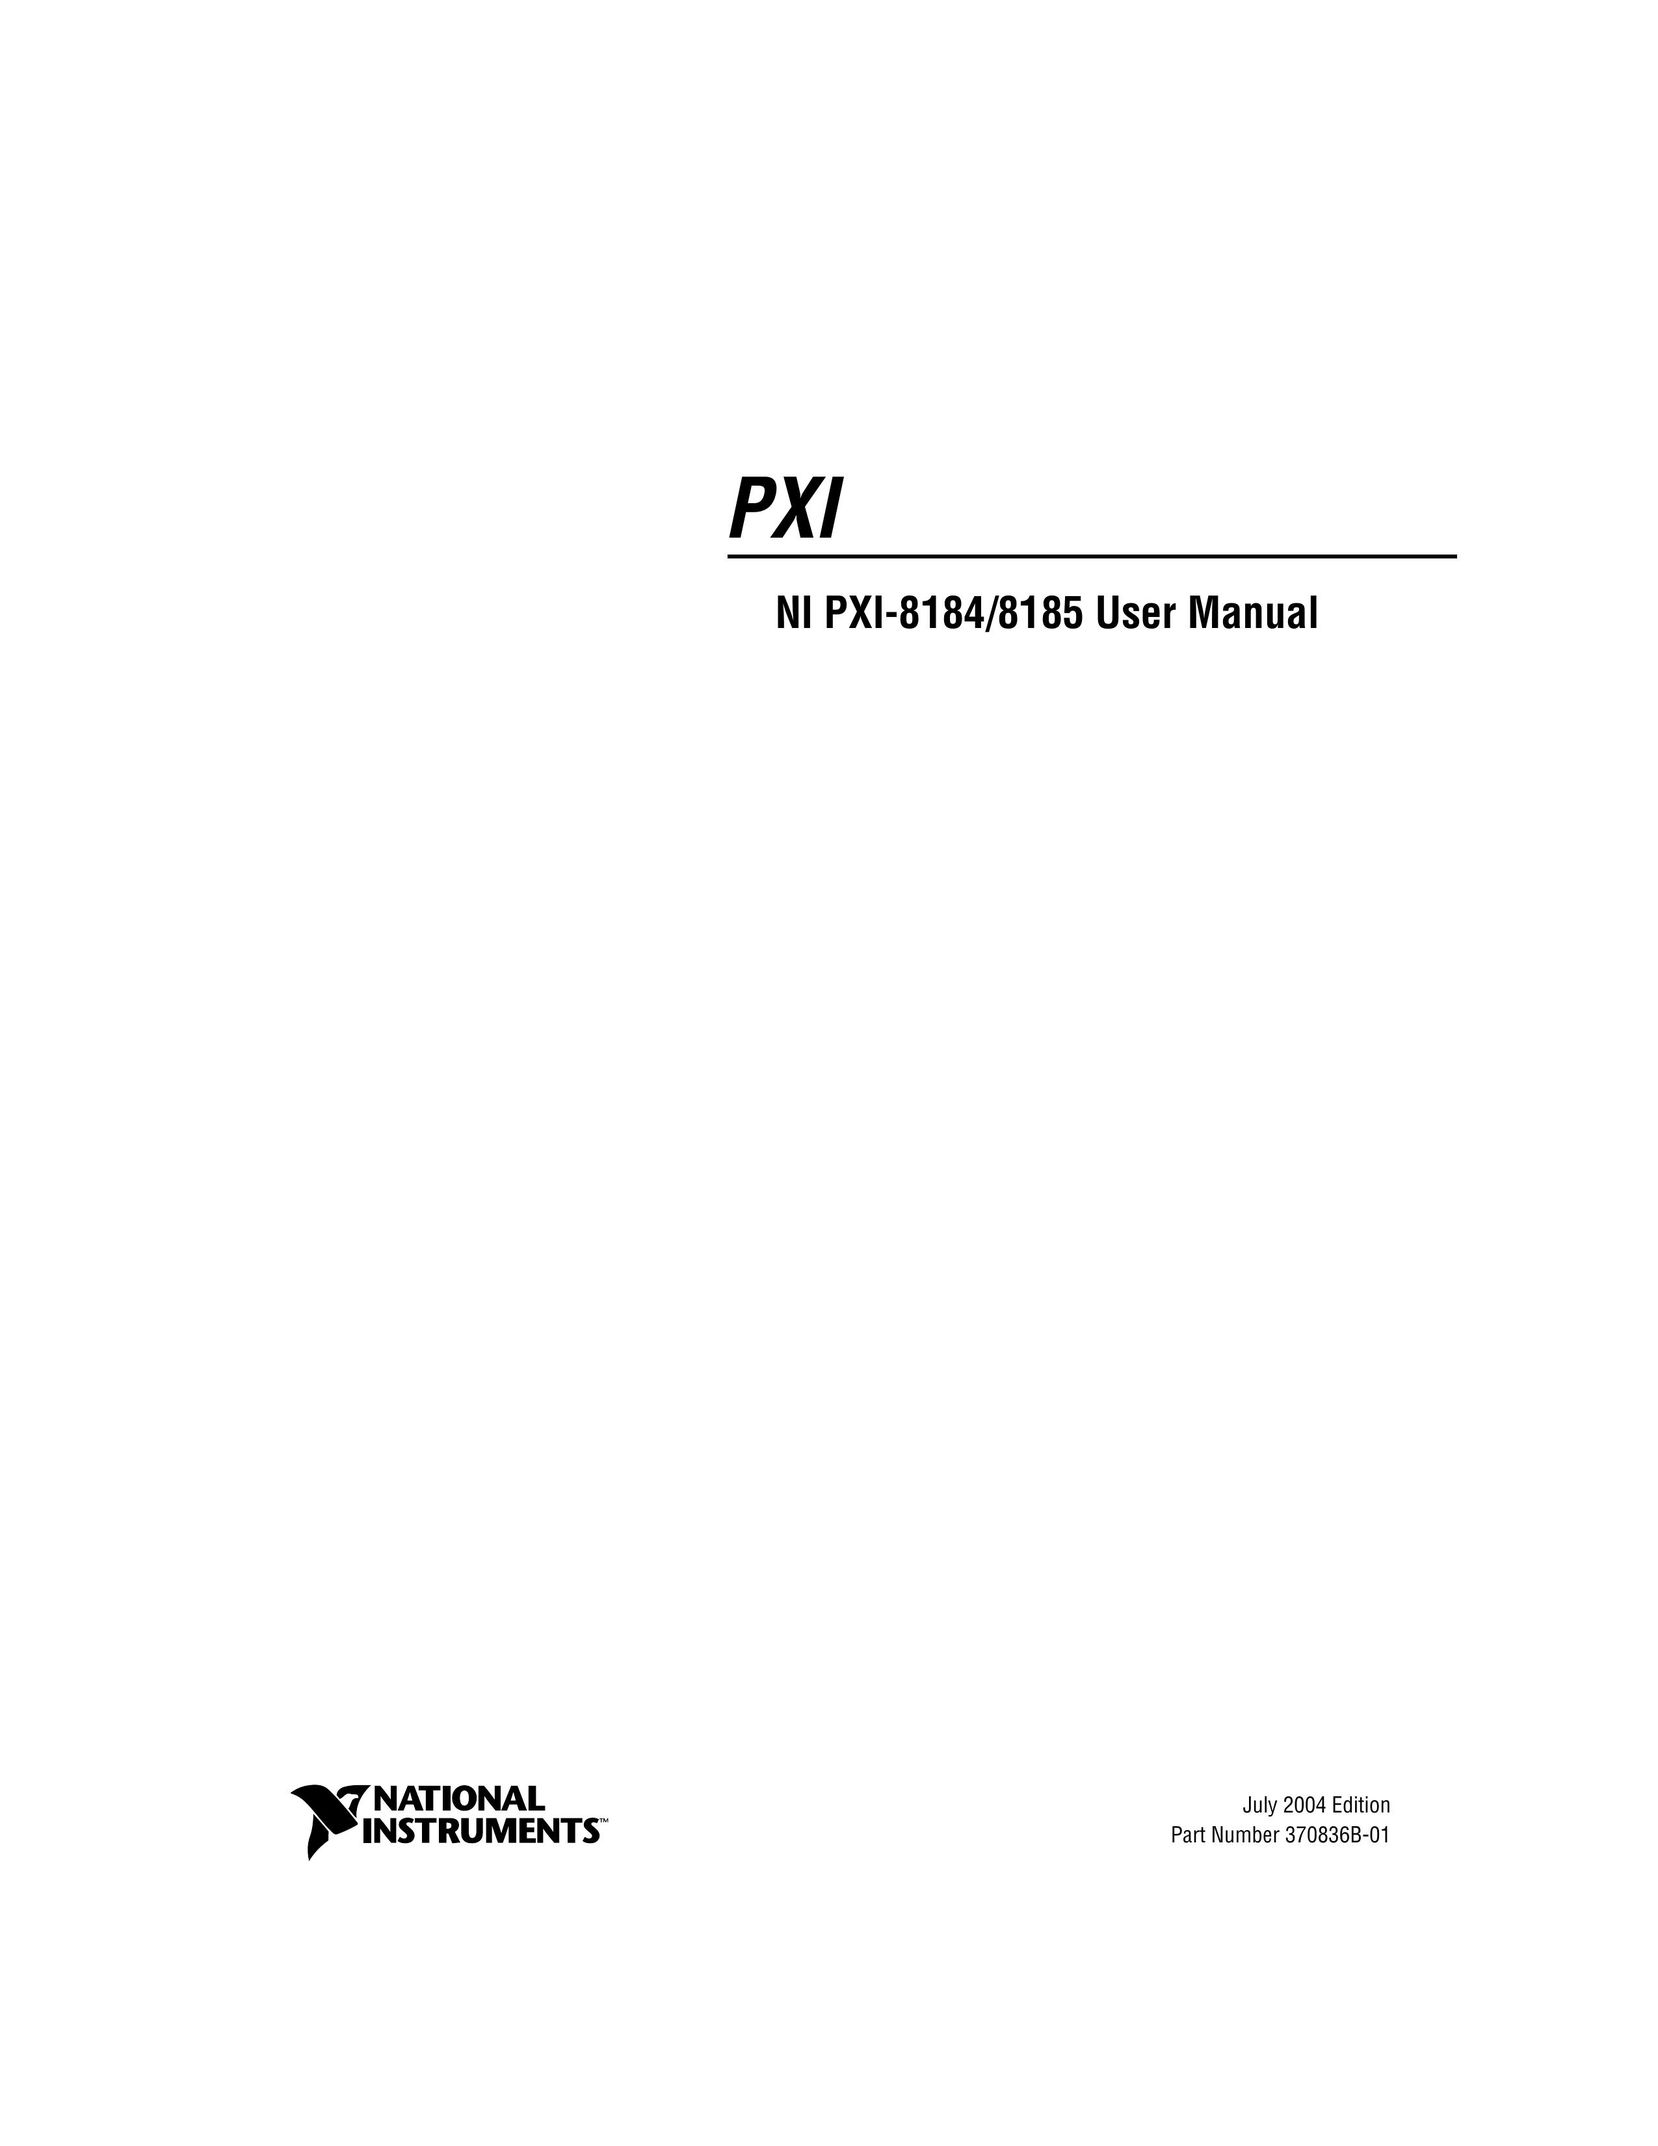 National Instruments PXI-8185 Personal Computer User Manual